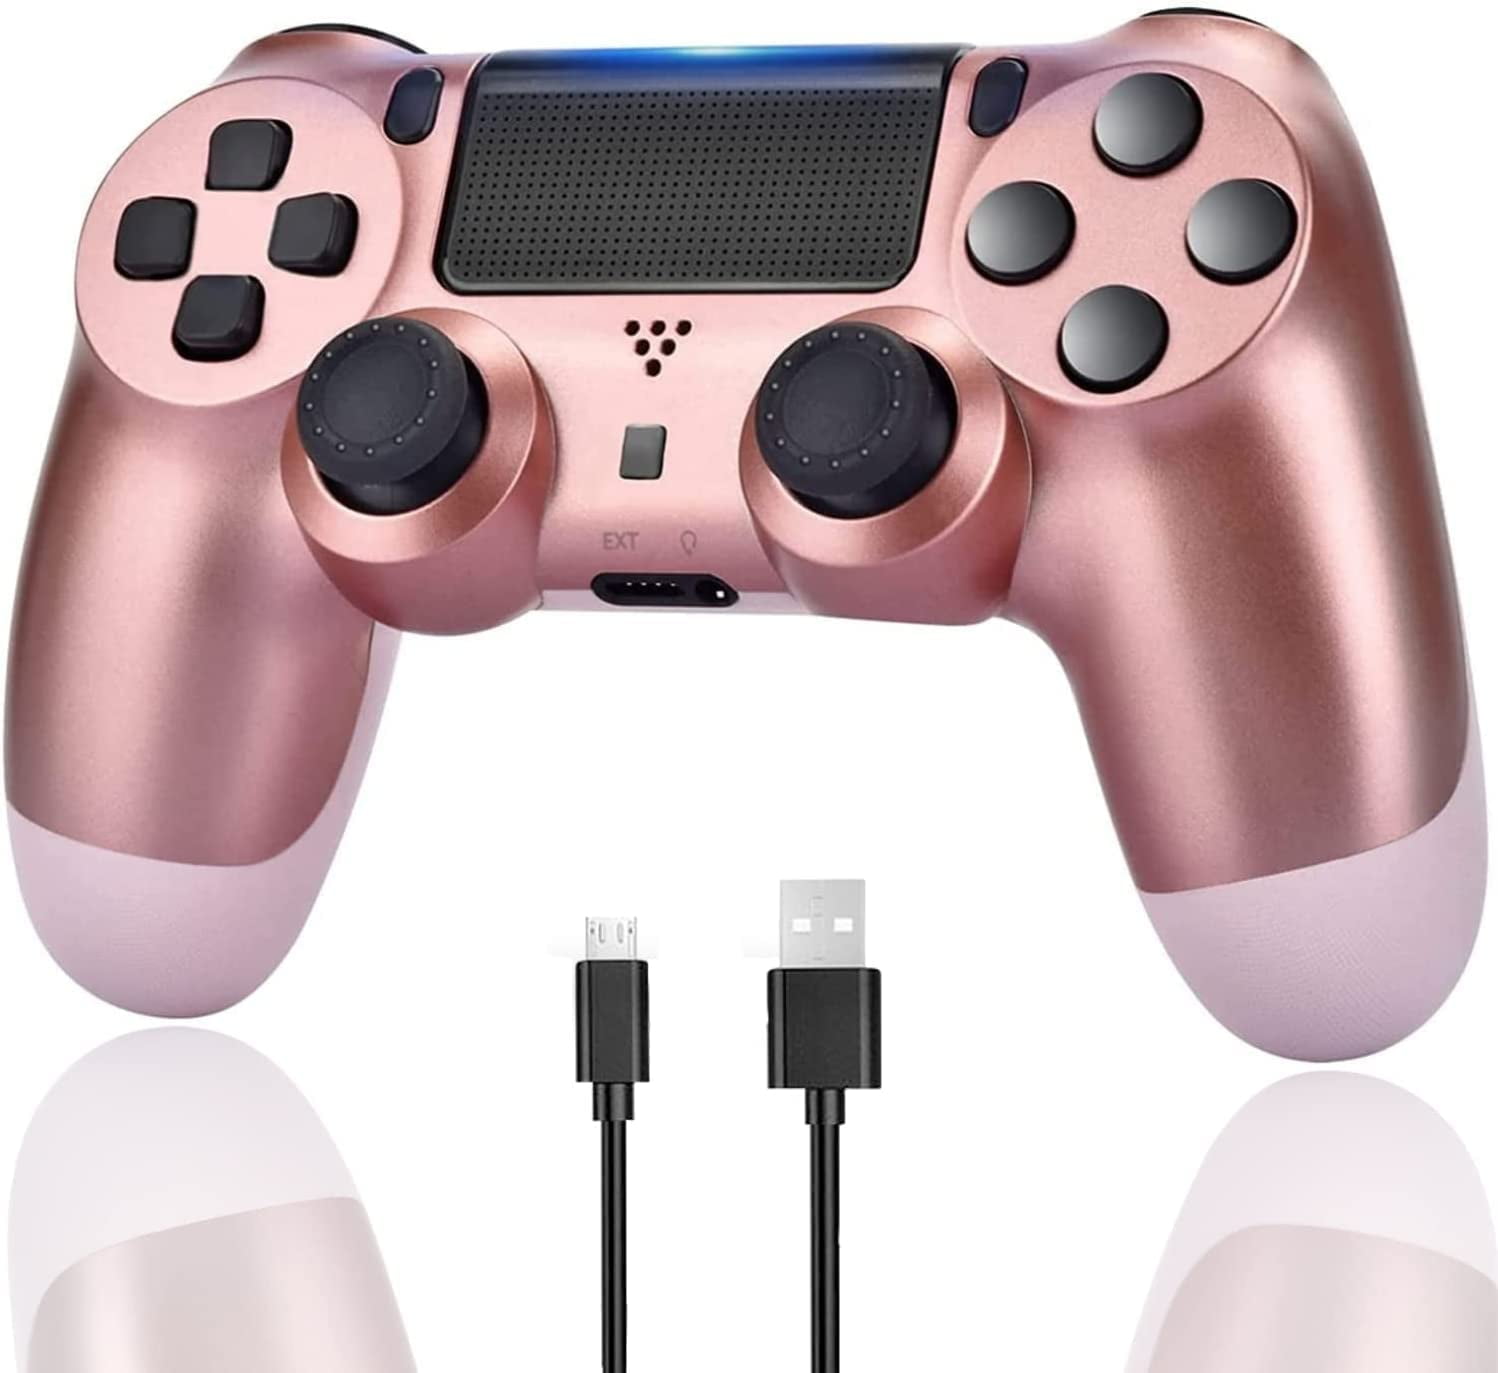 CFWQH Wireless Controller Compatible with PS4/ Slim/Pro/PC, Gold New to Control PS4, Great Gamepad Gift Kids/Man/Girls/Women - Walmart.com